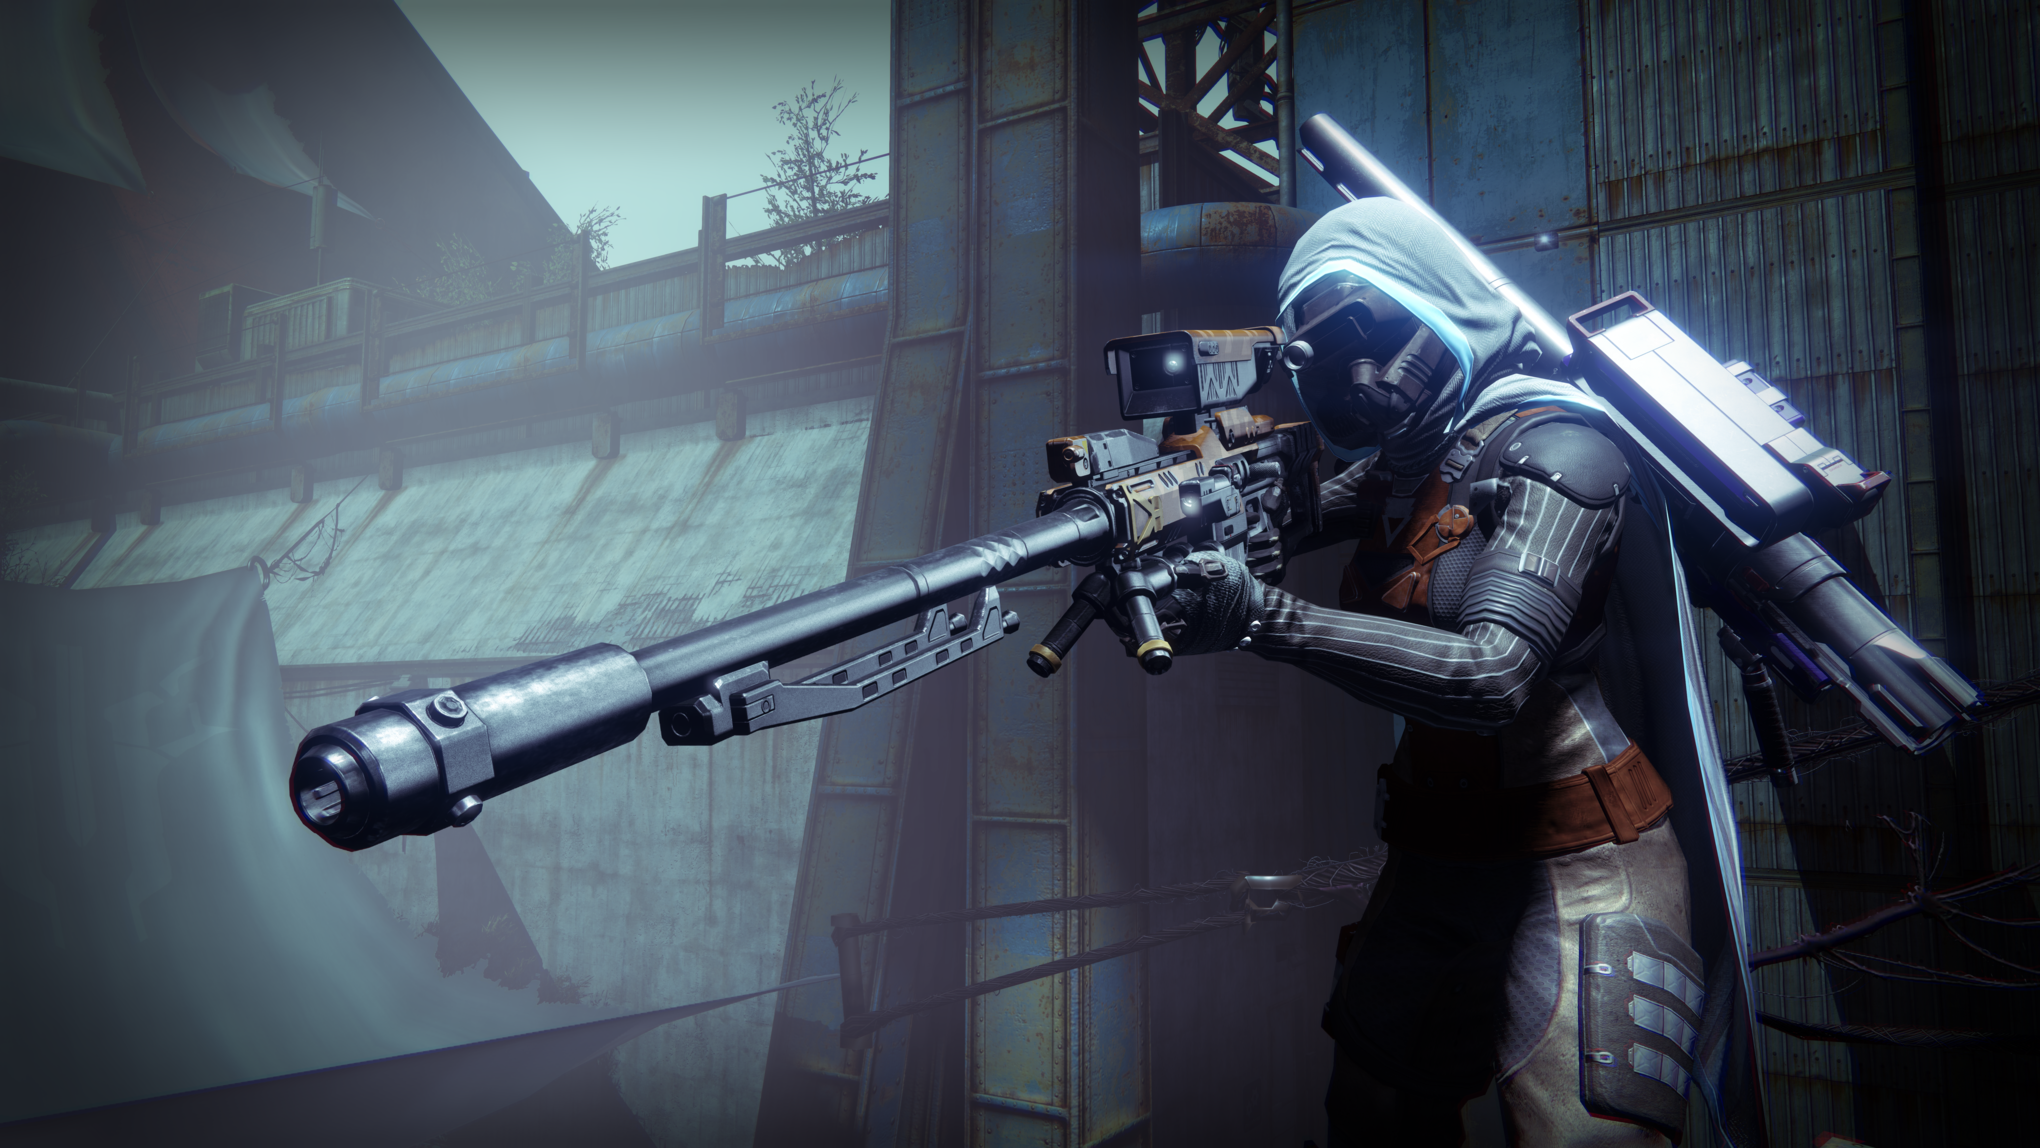  What is Bungie doing with Destiny that moves shooting games forward